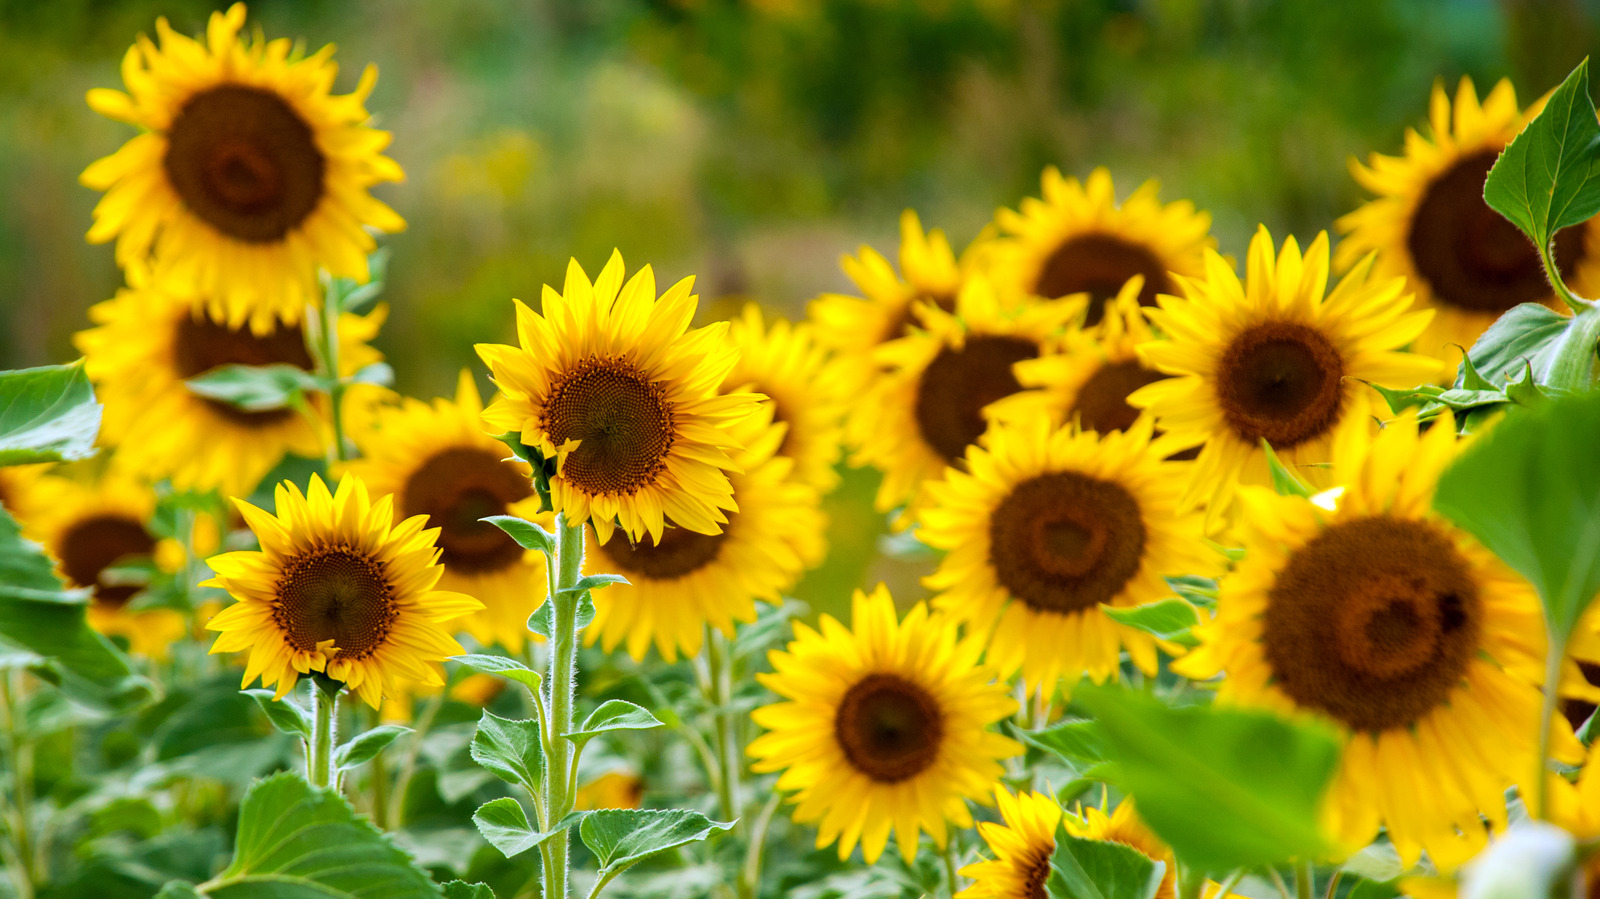 https://www.housedigest.com/img/gallery/sunflowers-everything-you-need-to-know-before-planting/l-intro-1641582224.jpg